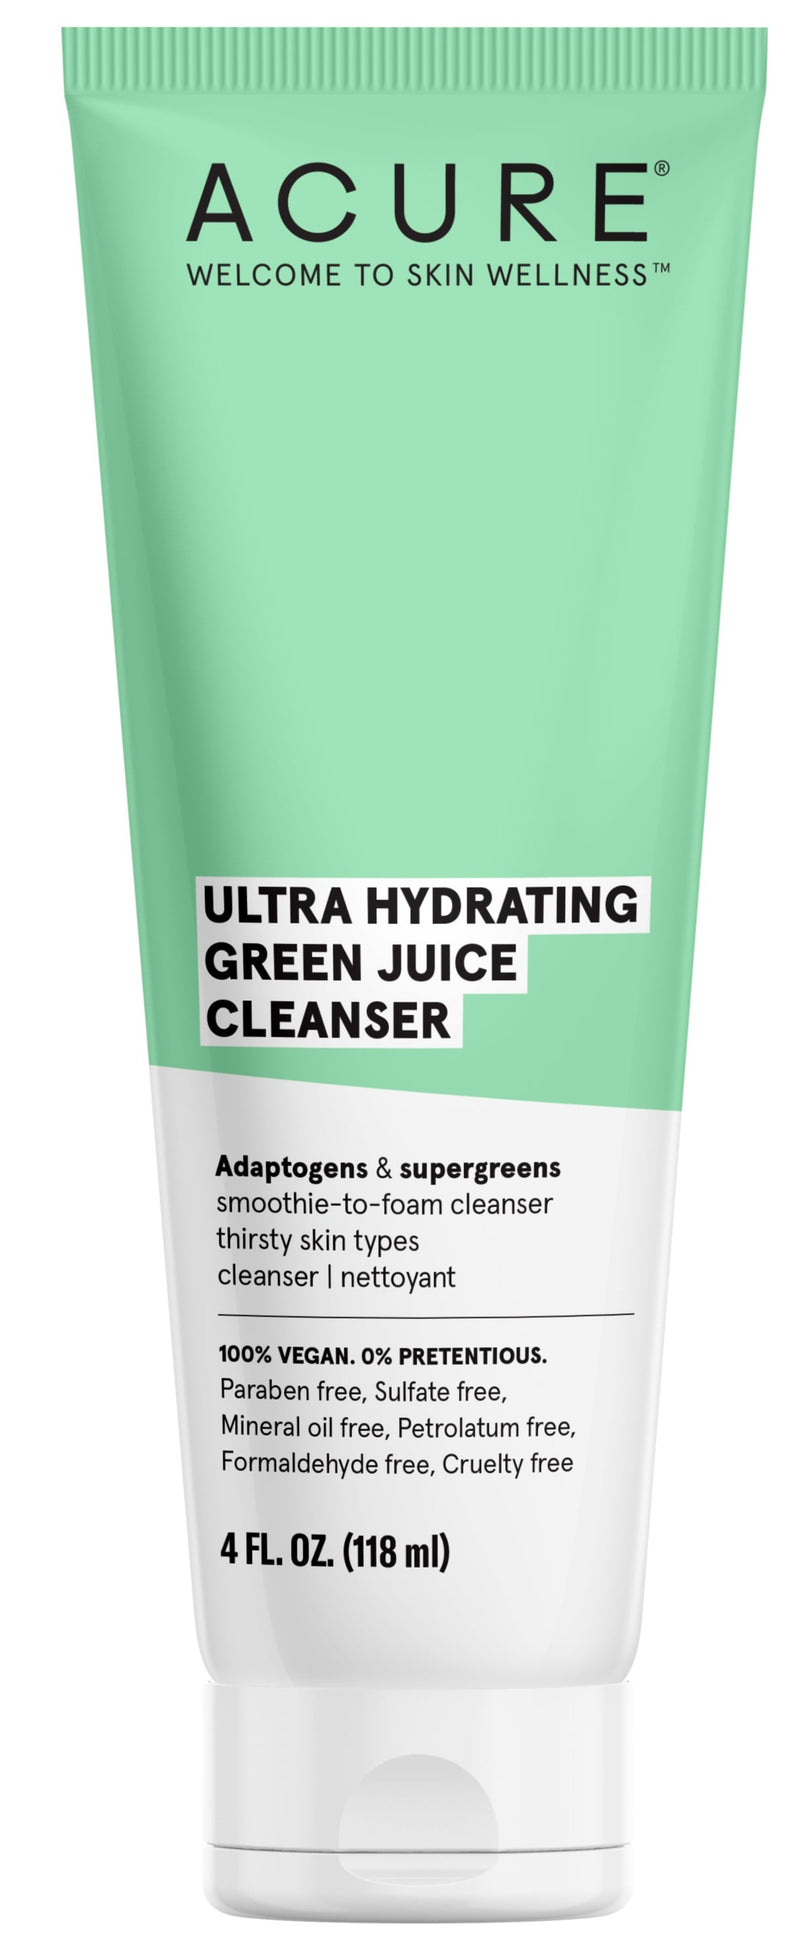 Acure Ultra Hydrating Green Juice Cleanser - MeStore